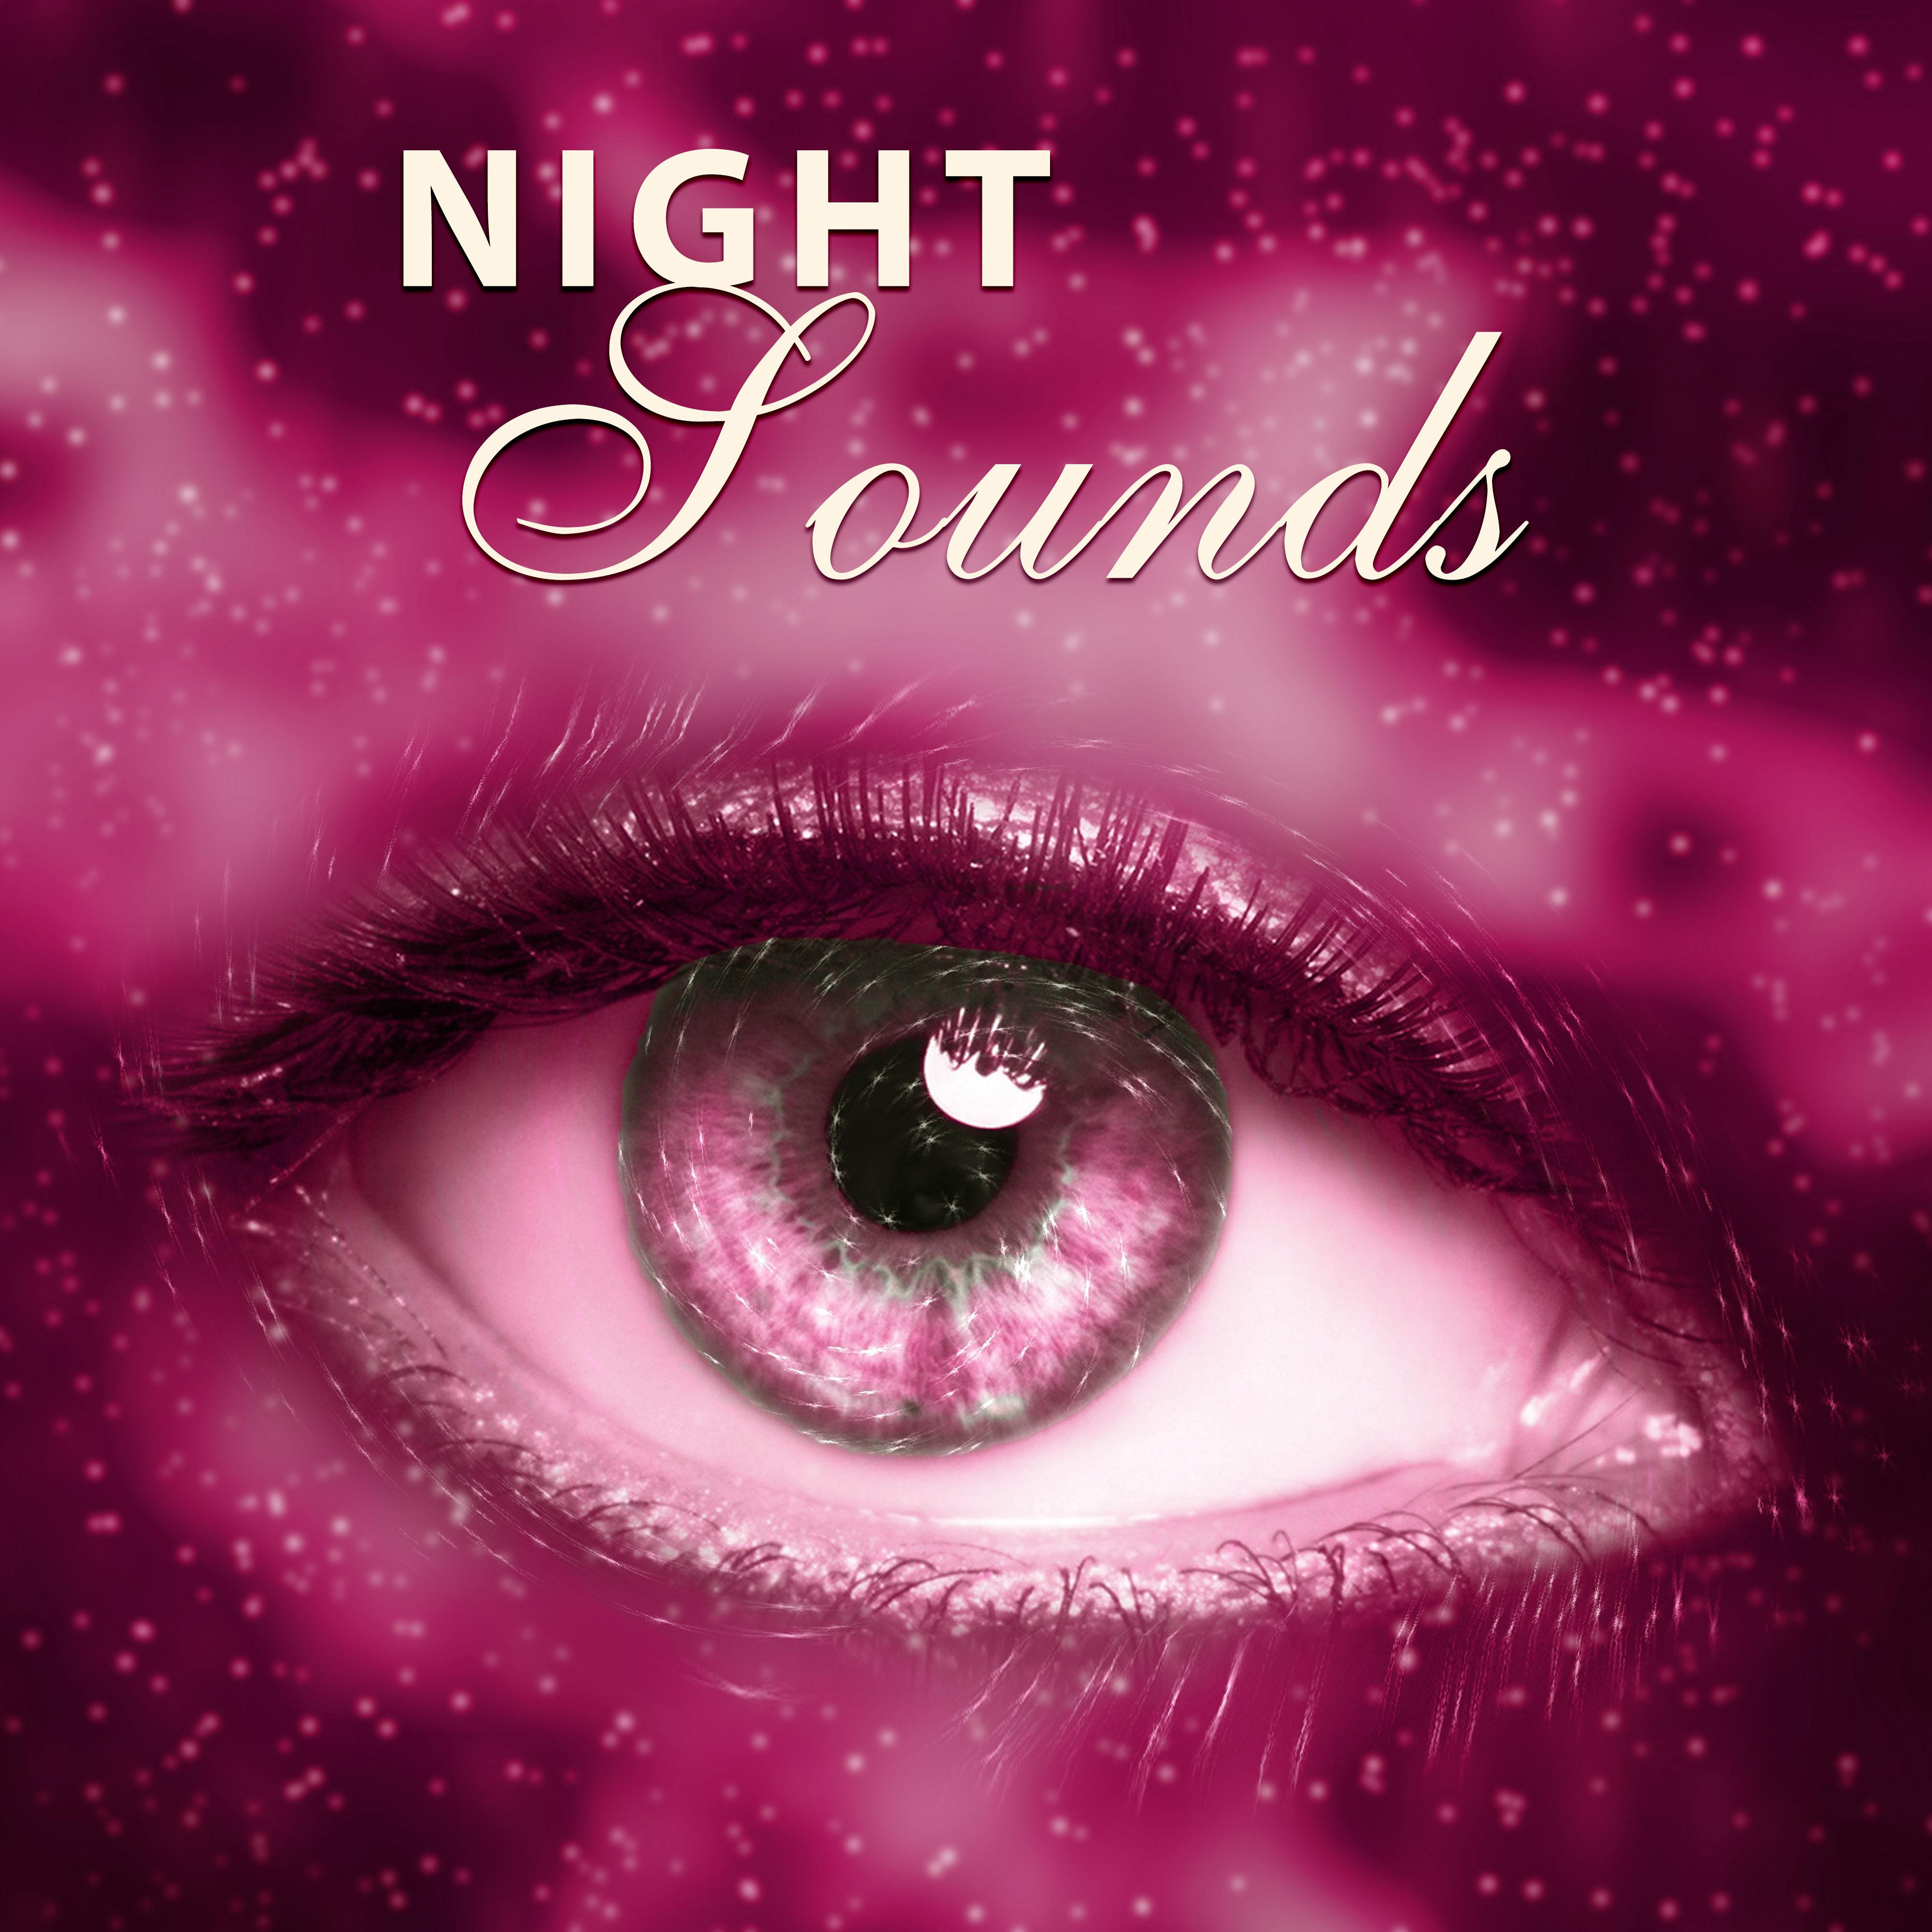 Night Sounds – New Age Music, Ambient Sleep, Dreaming All Night, Calmness, Night Sky